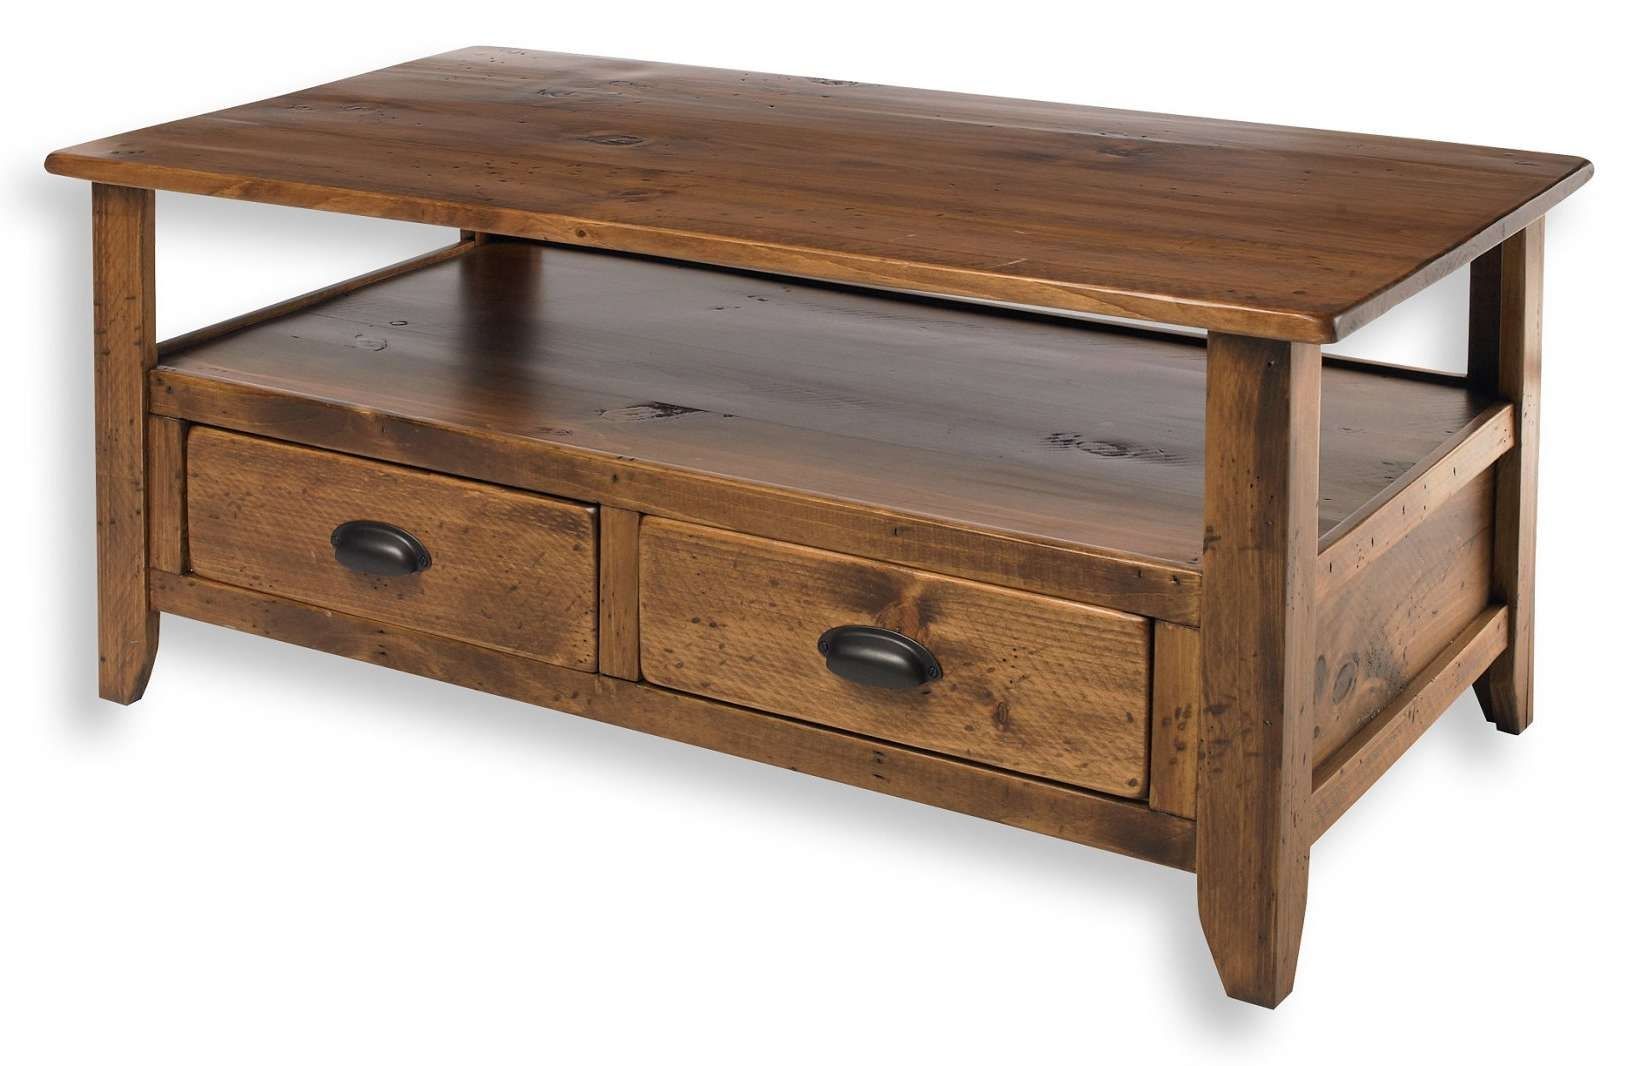 Most Recent Small Coffee Tables With Drawer In Coffee Tables : Rustic Coffee Table With Storage Tables And End (View 16 of 20)